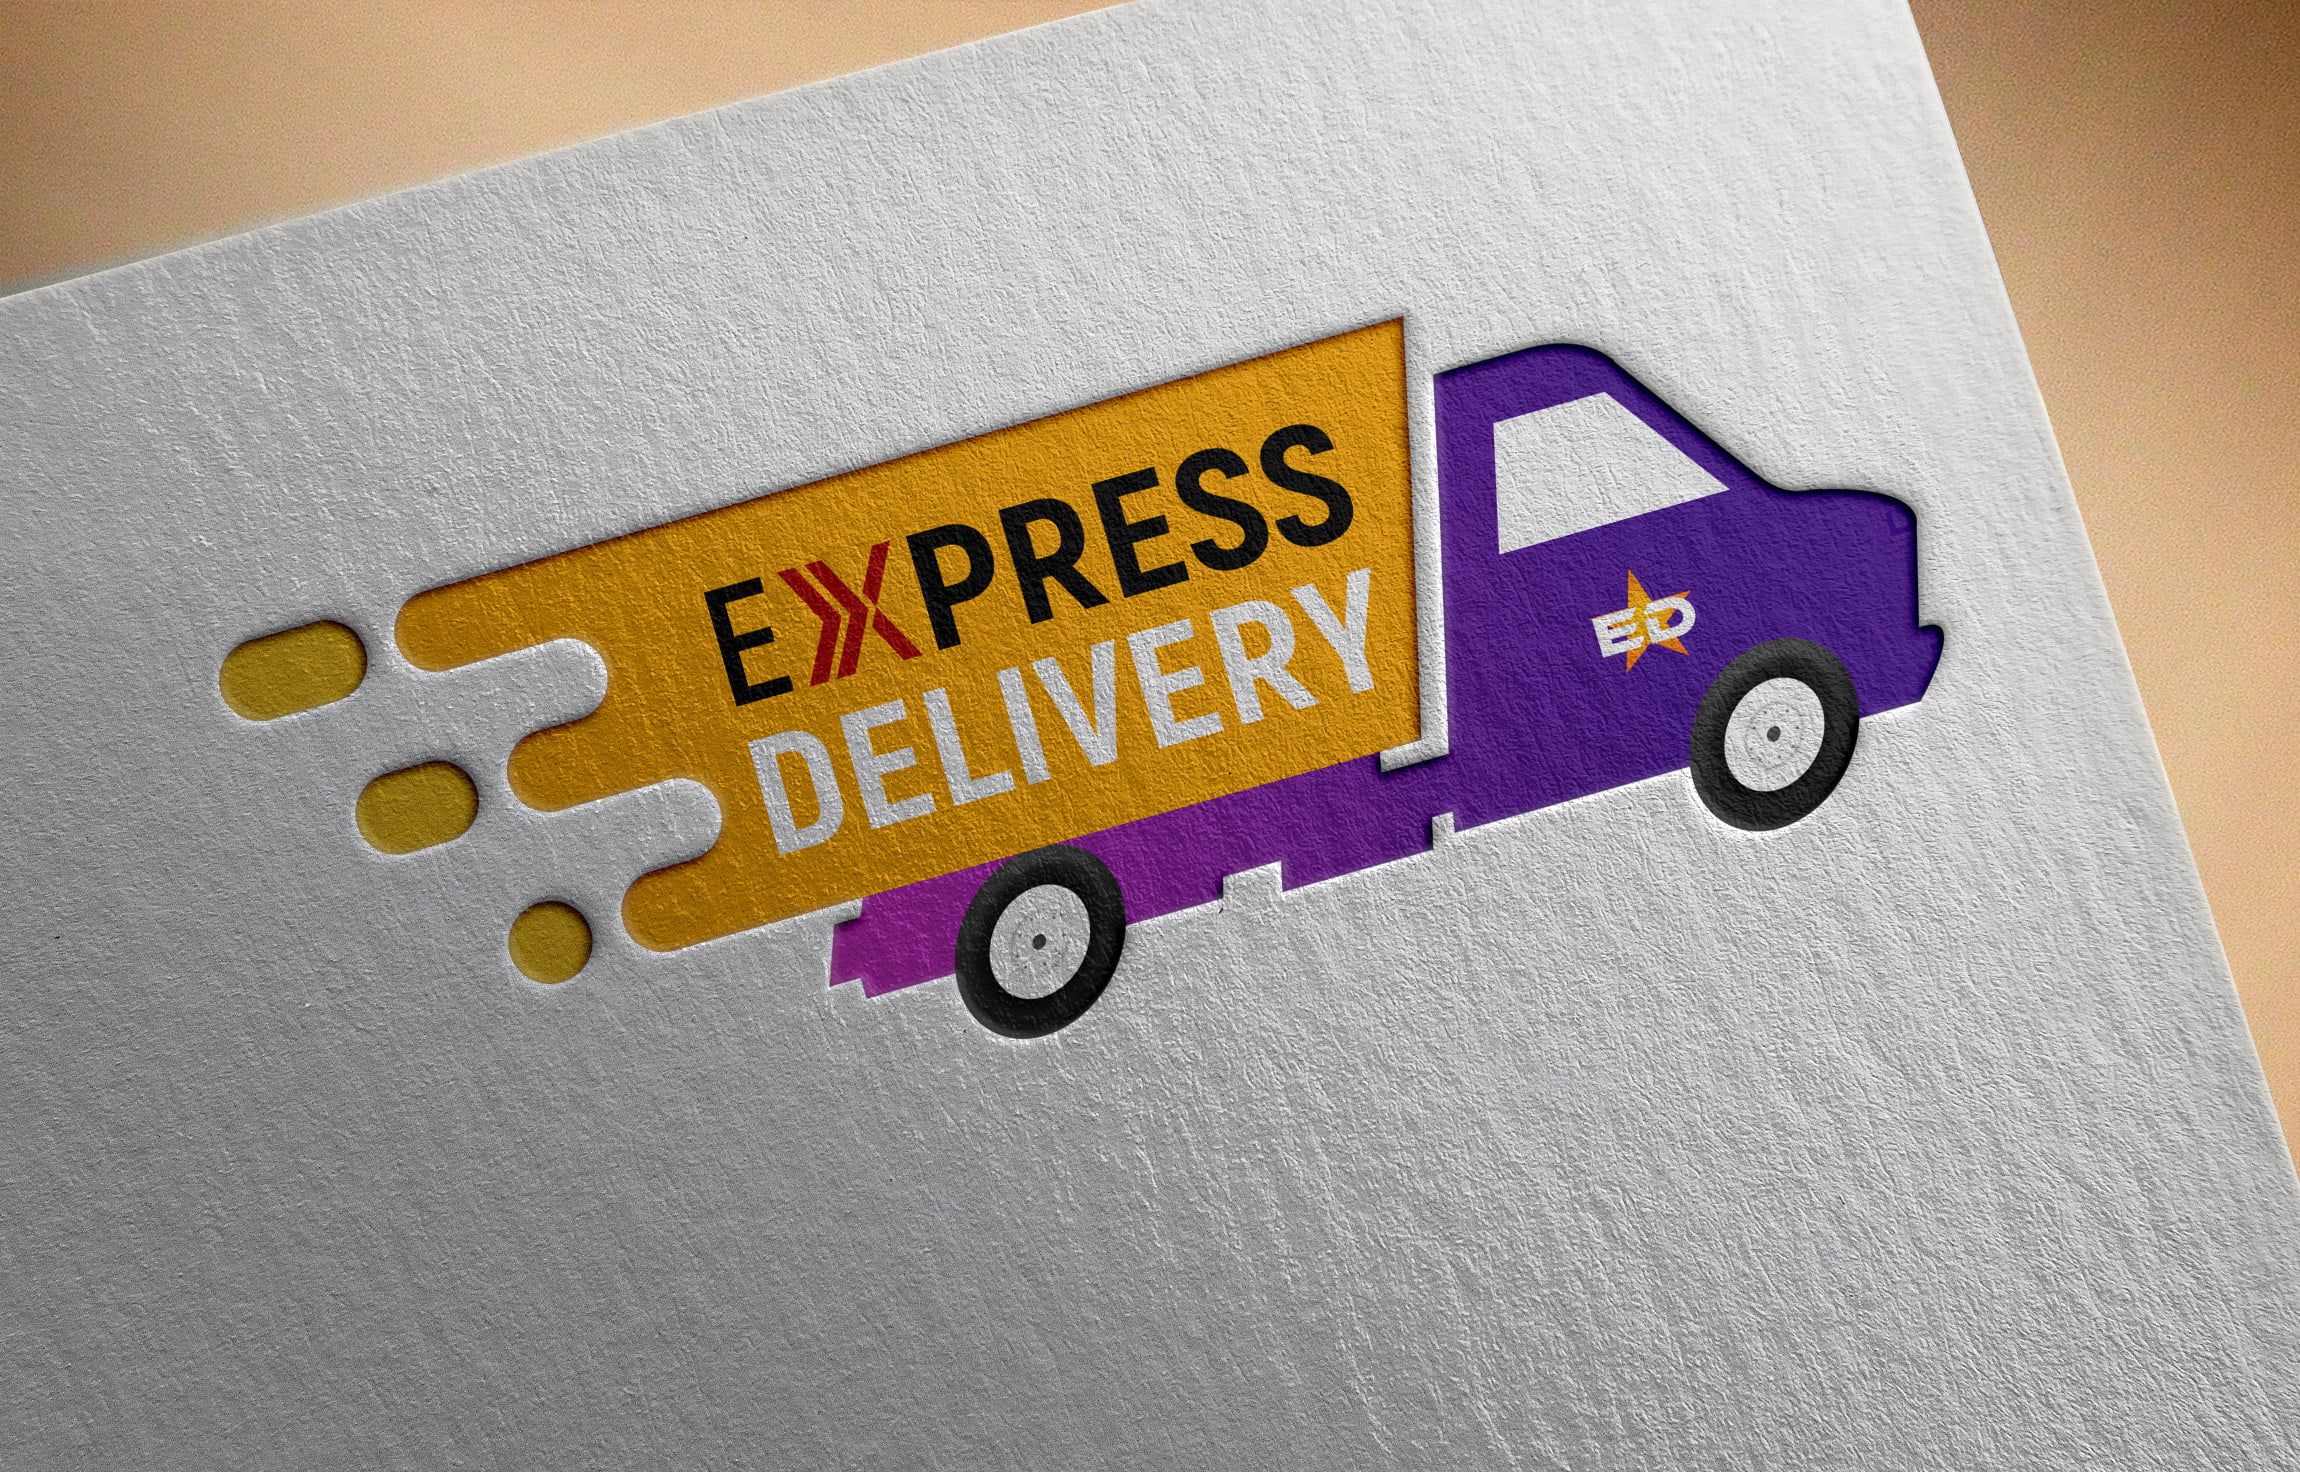 Express Delivery Icon - Download in Line Style